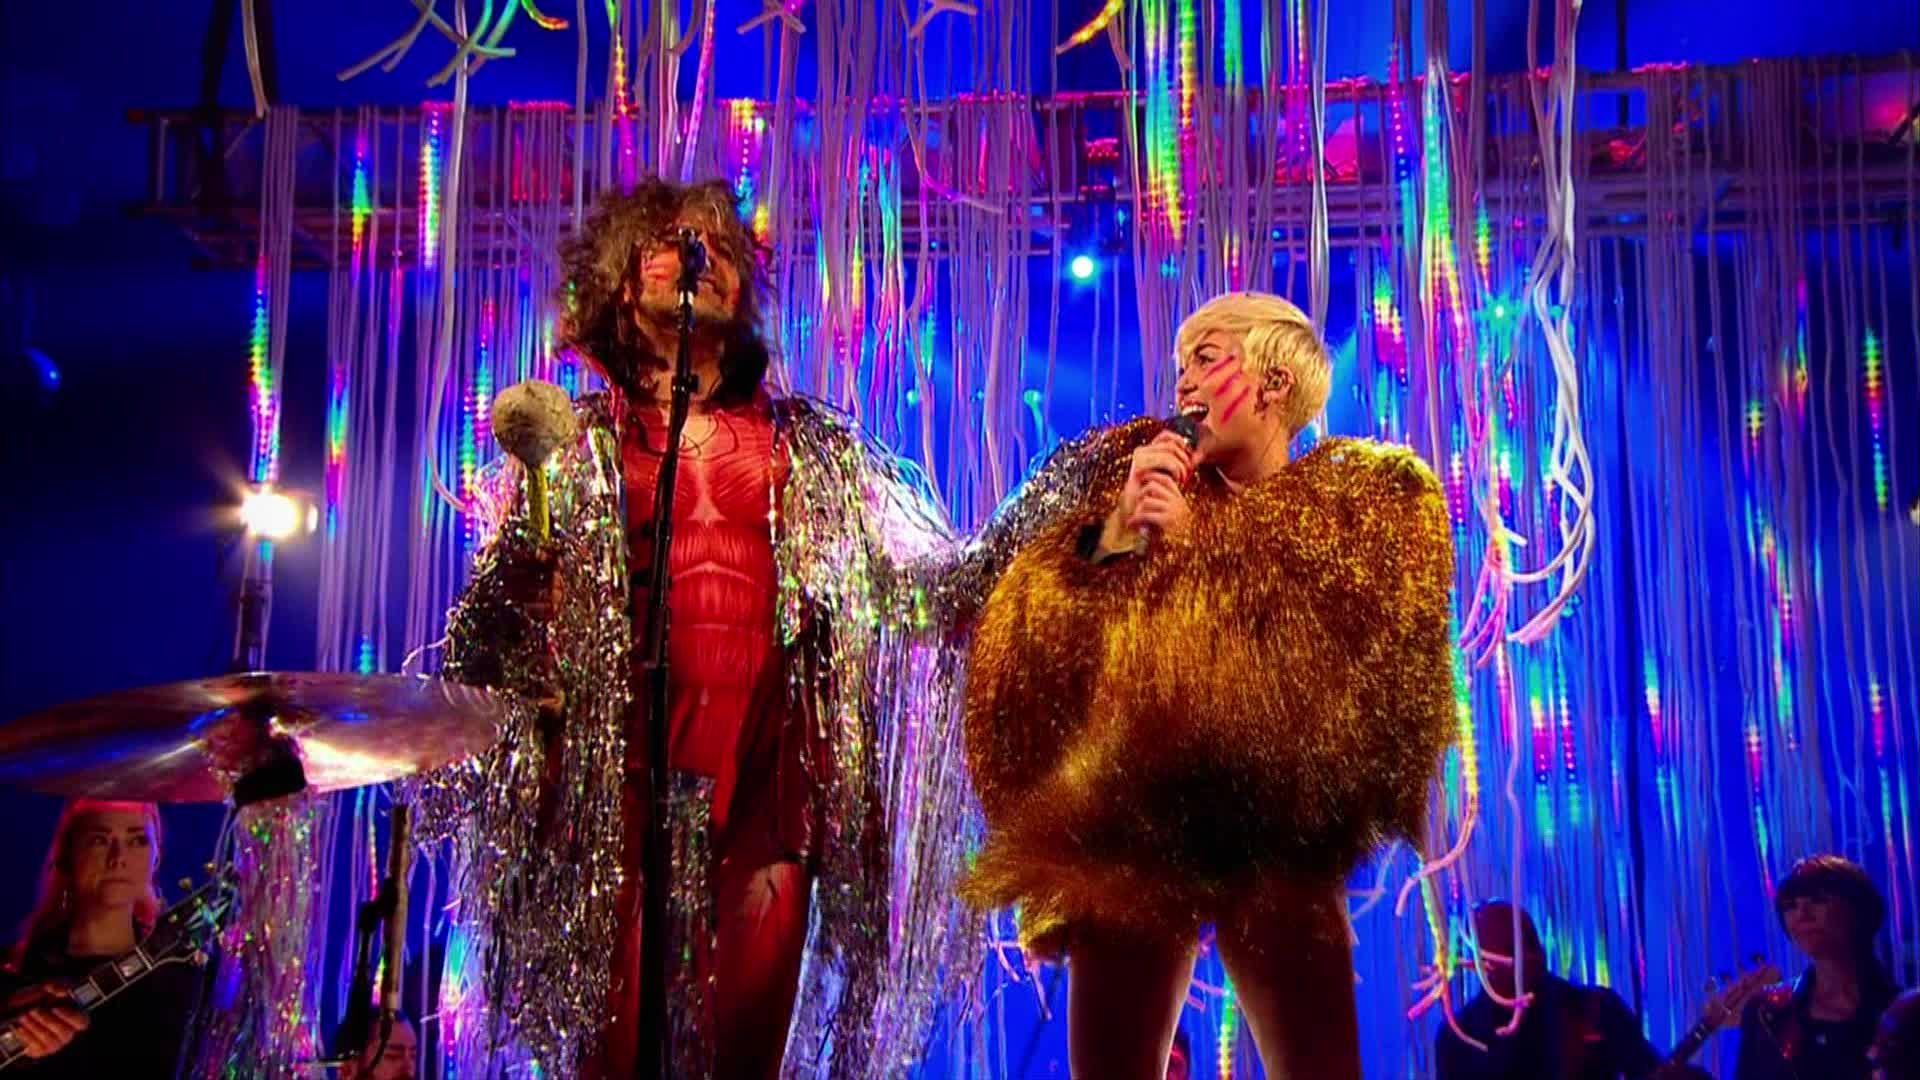 Miley Cyrus [ft The Flaming Lips] - 2014-05-18, Billboard Music Awards - 1080 TS - LSD preview 25